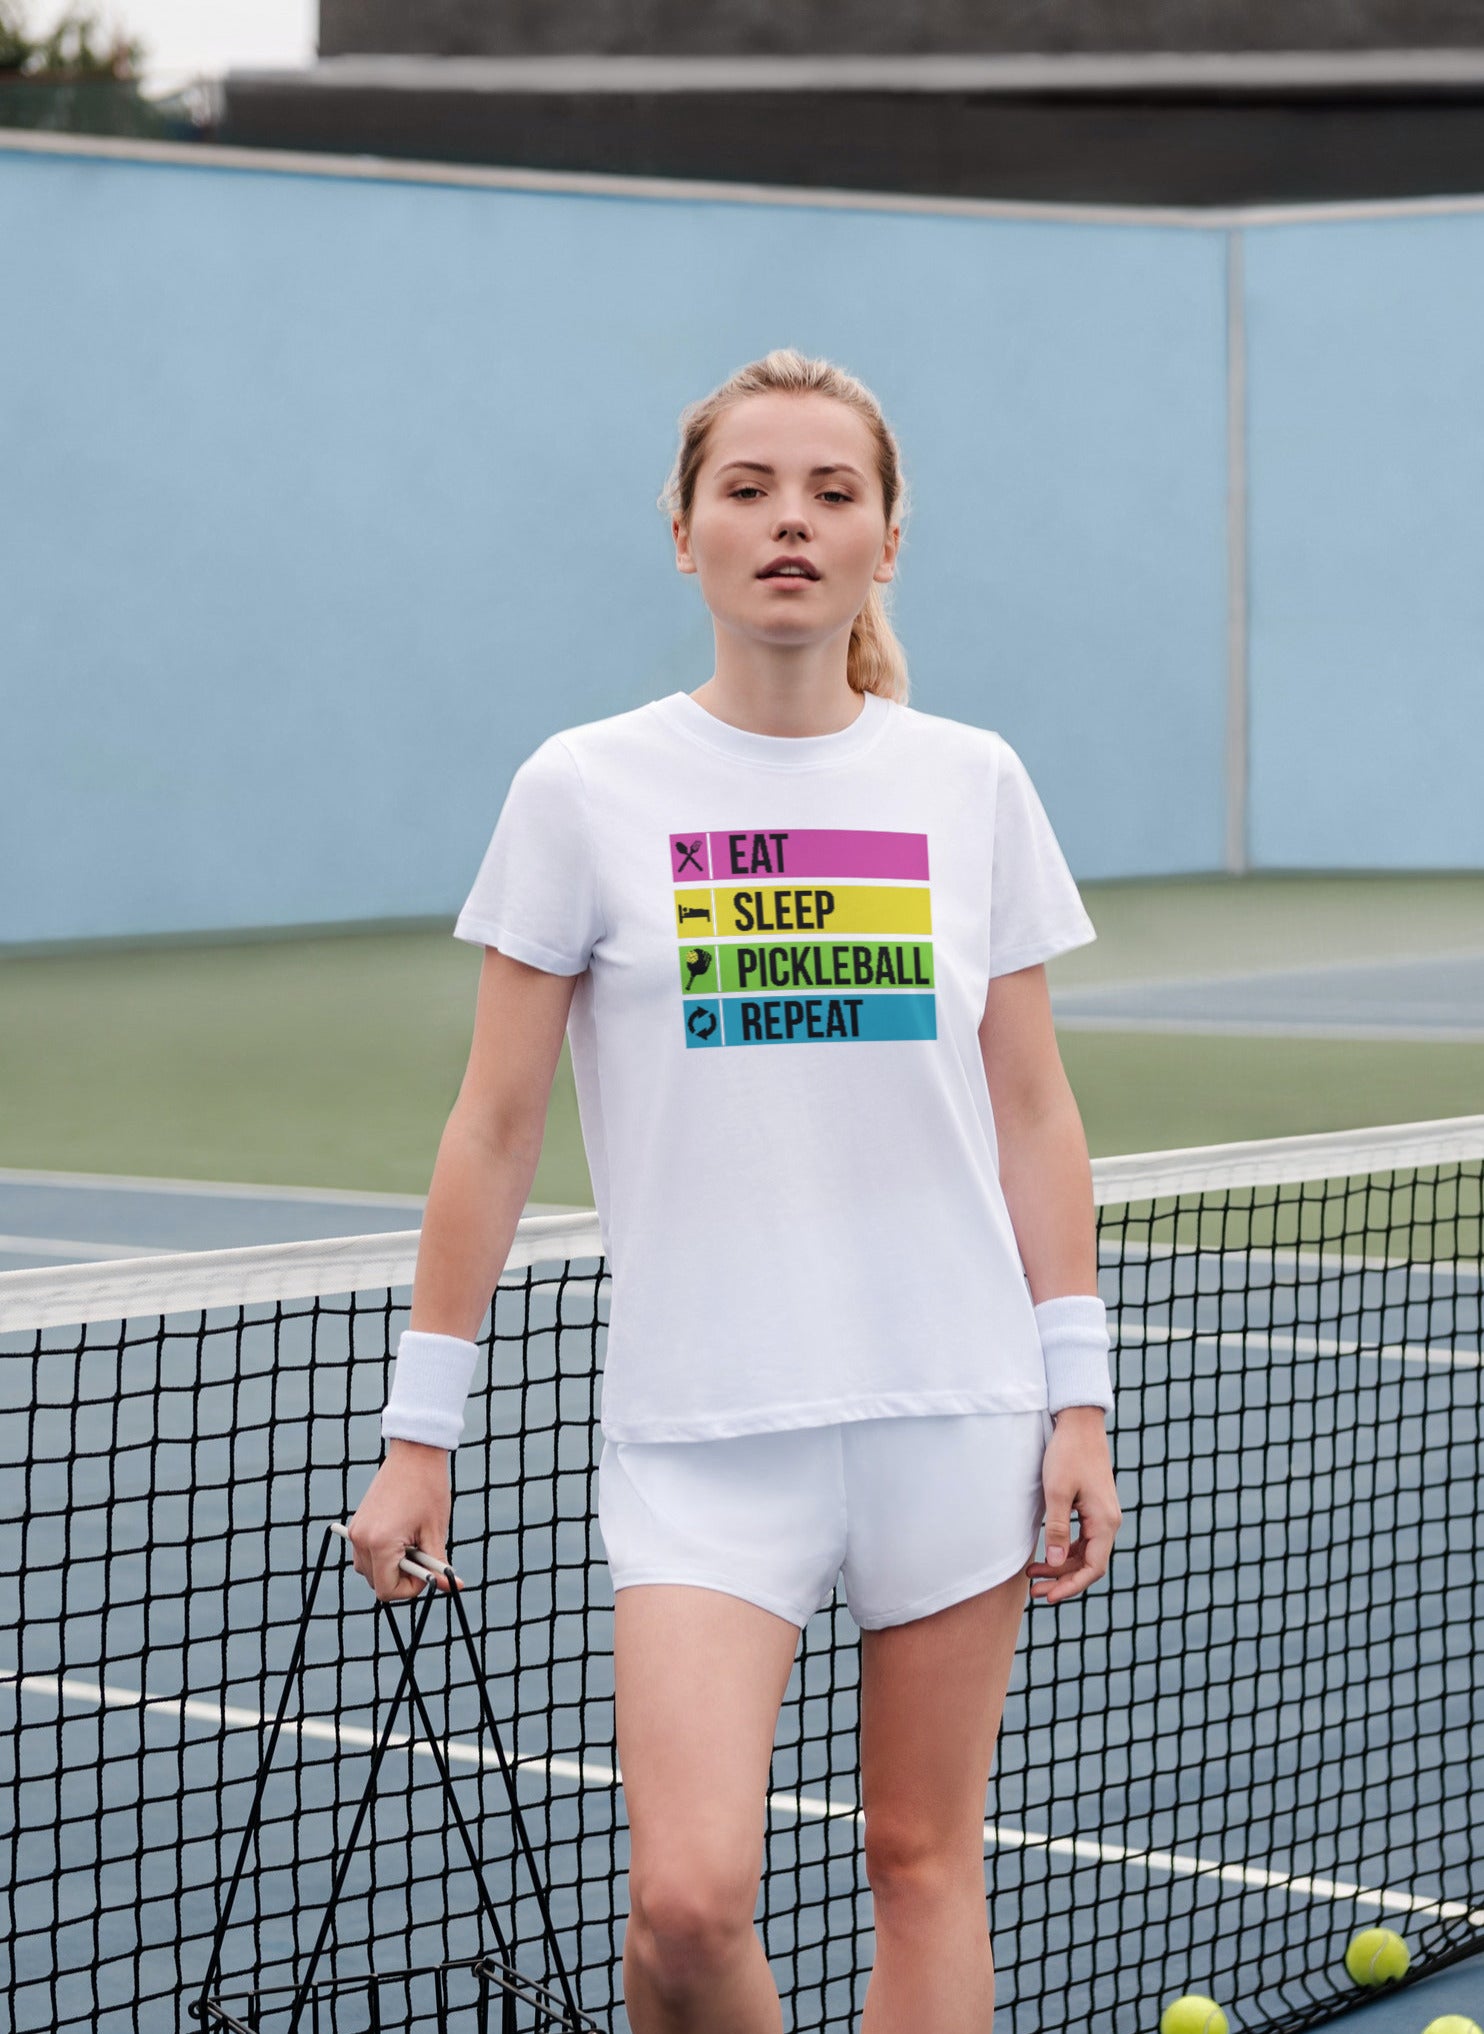 girl on court wearing white eat sleep pickleball repeat pickleball apparel shirt front view